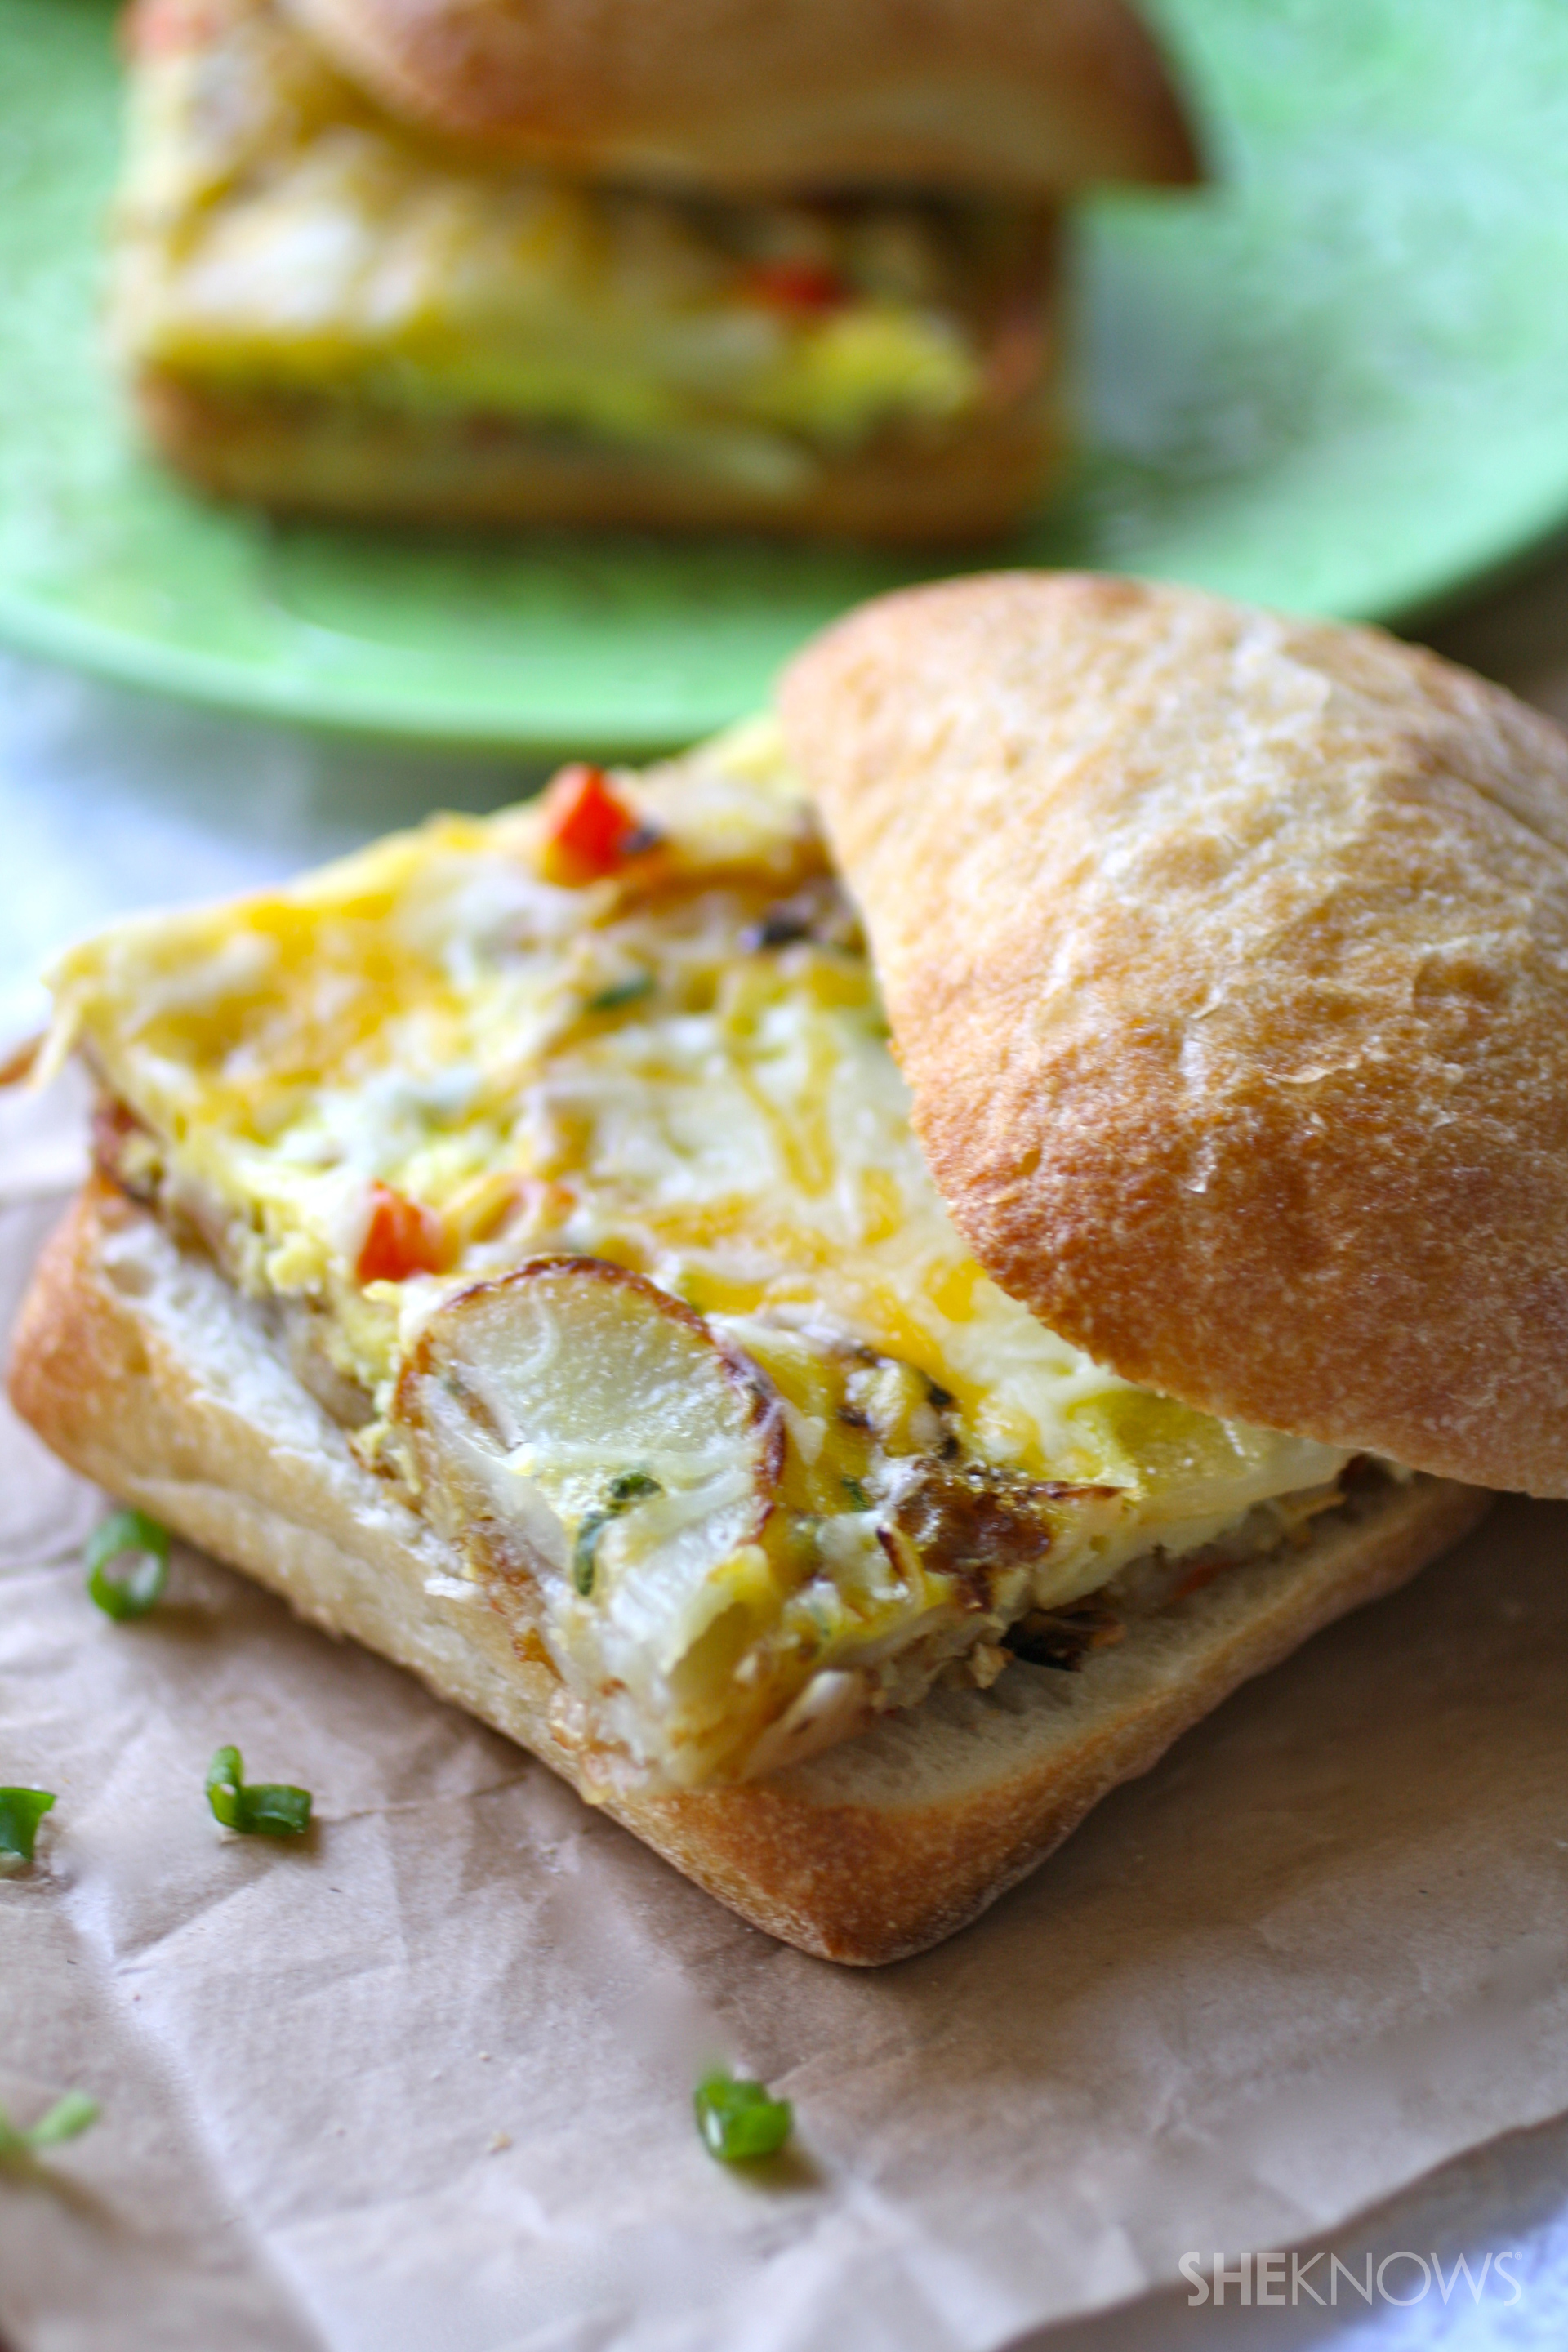 Meatless Monday: Spanish omelet sandwiches